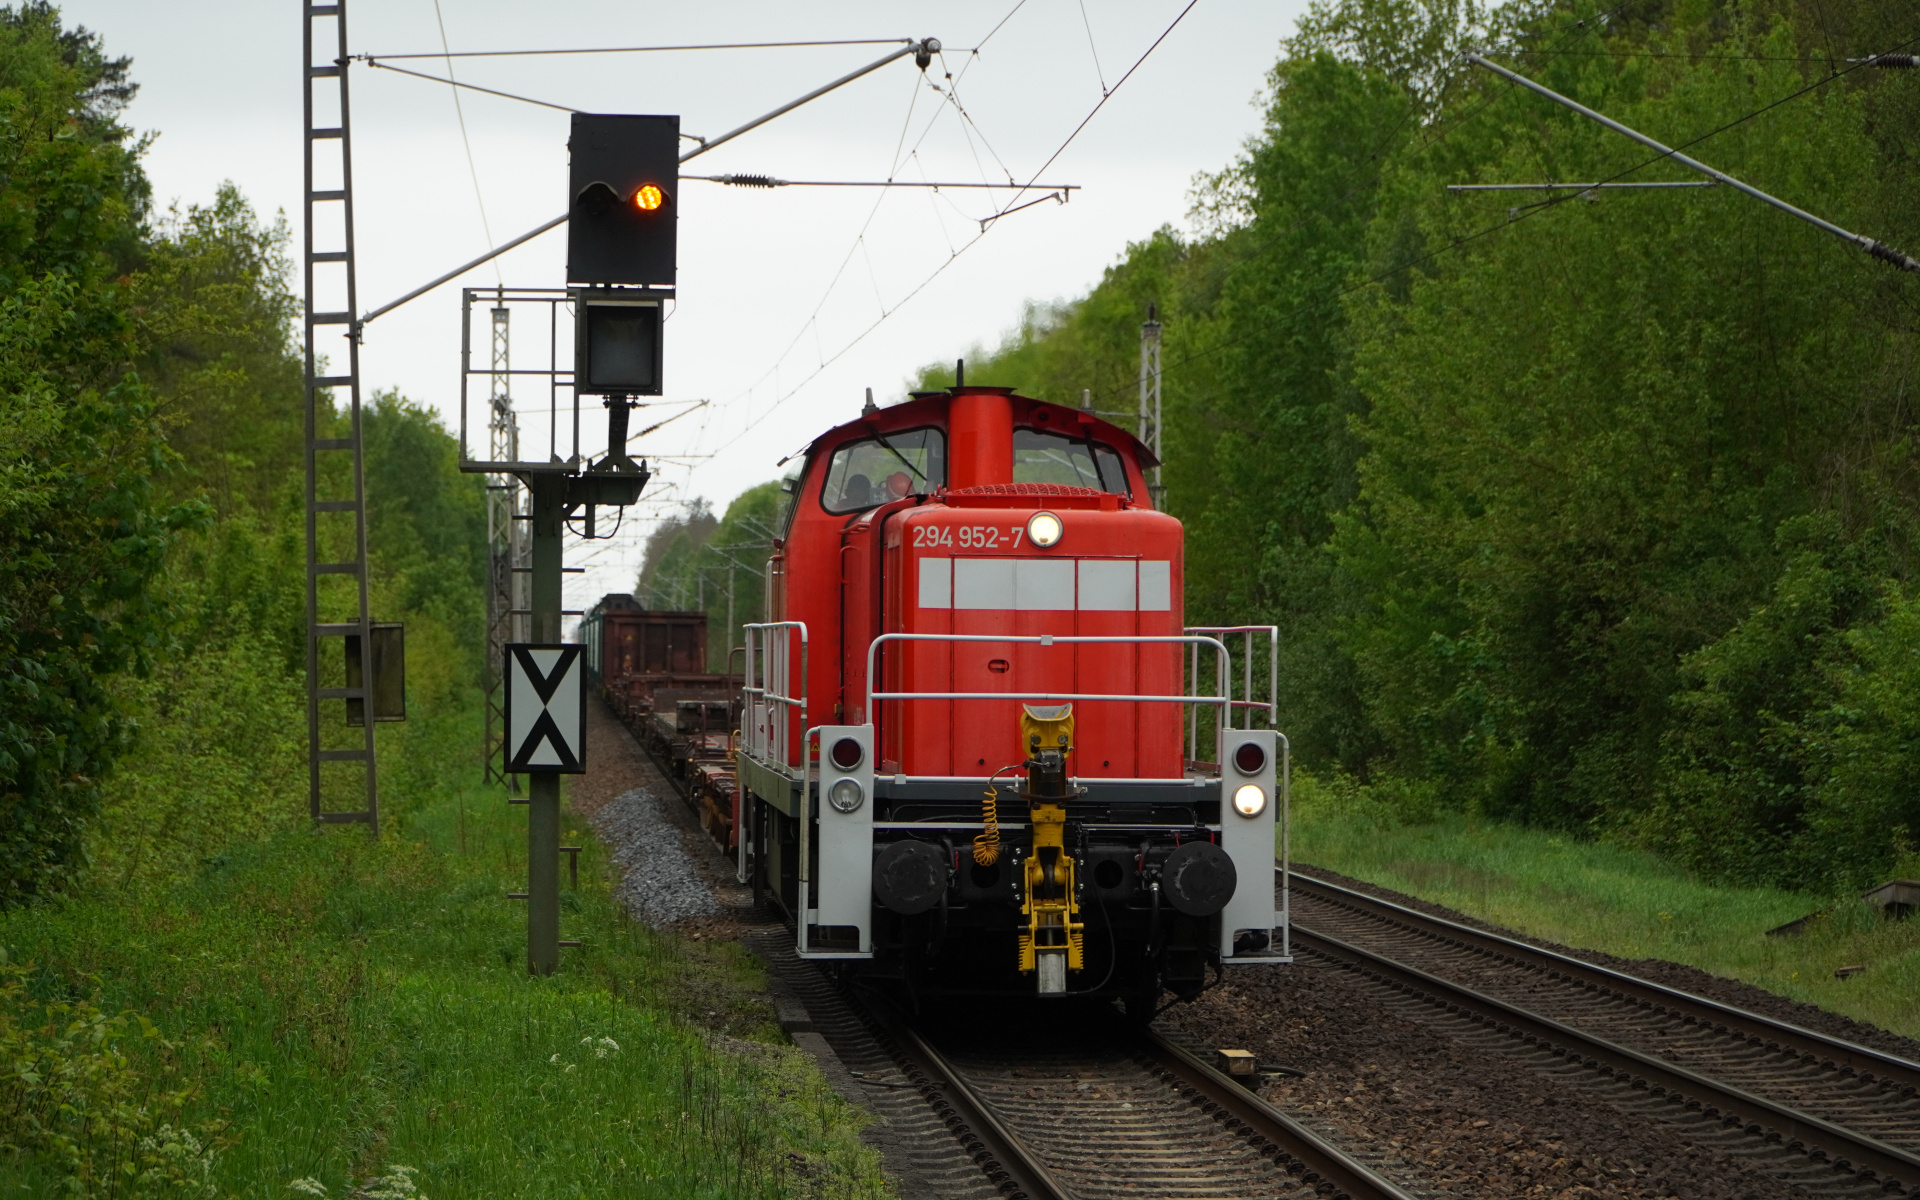 294 592-7 in Melchow